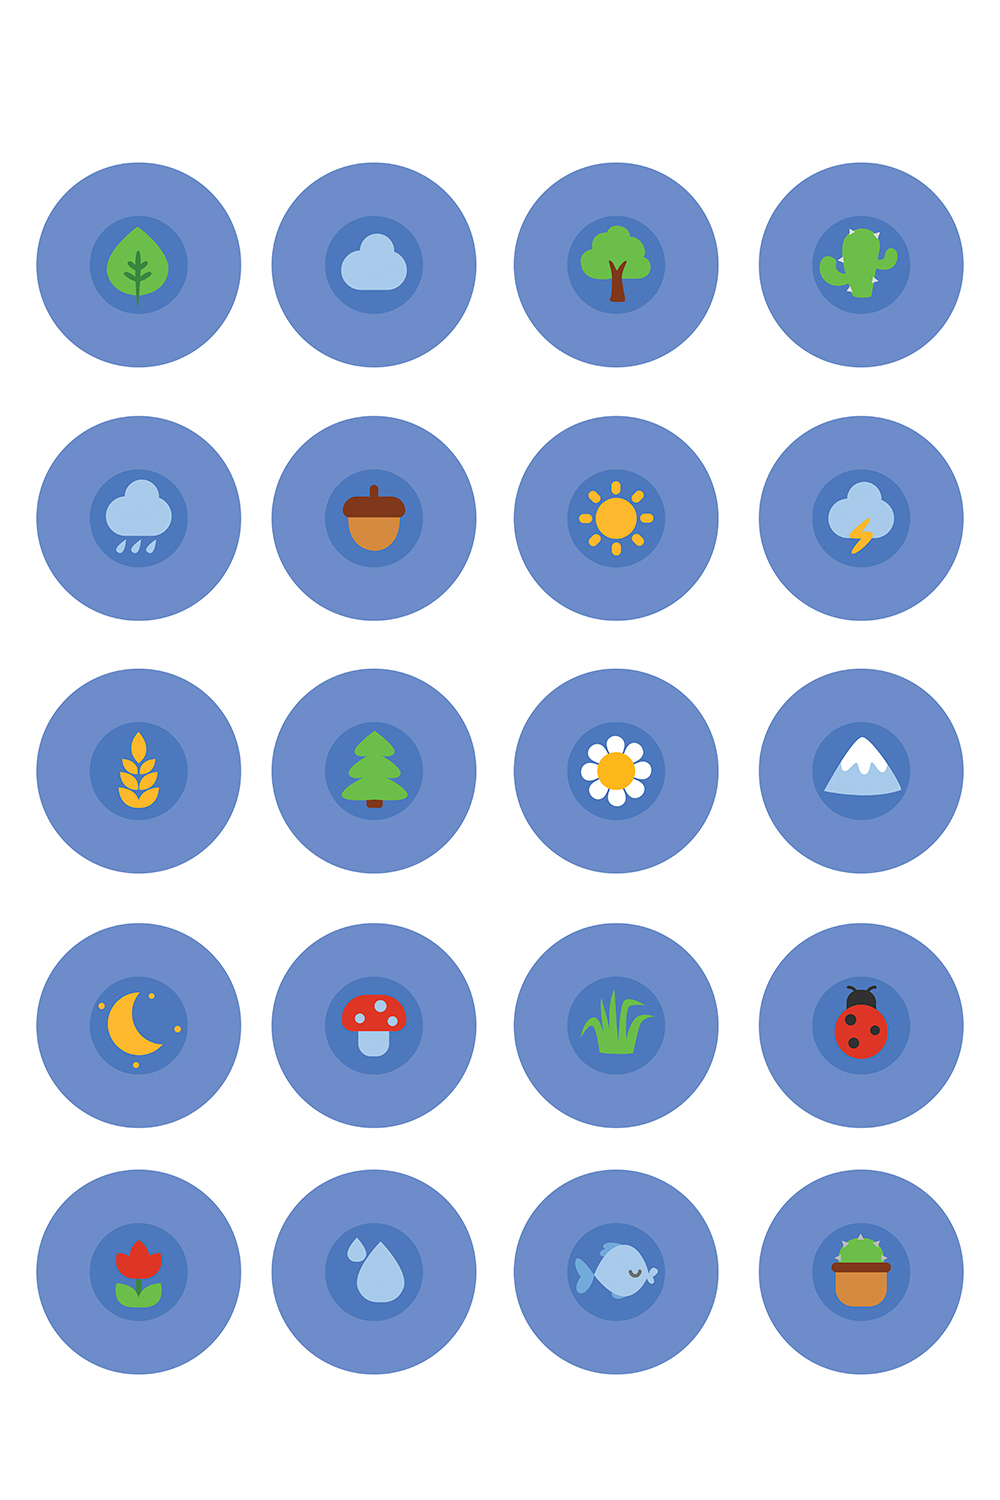 Blue circle with different icons on it.